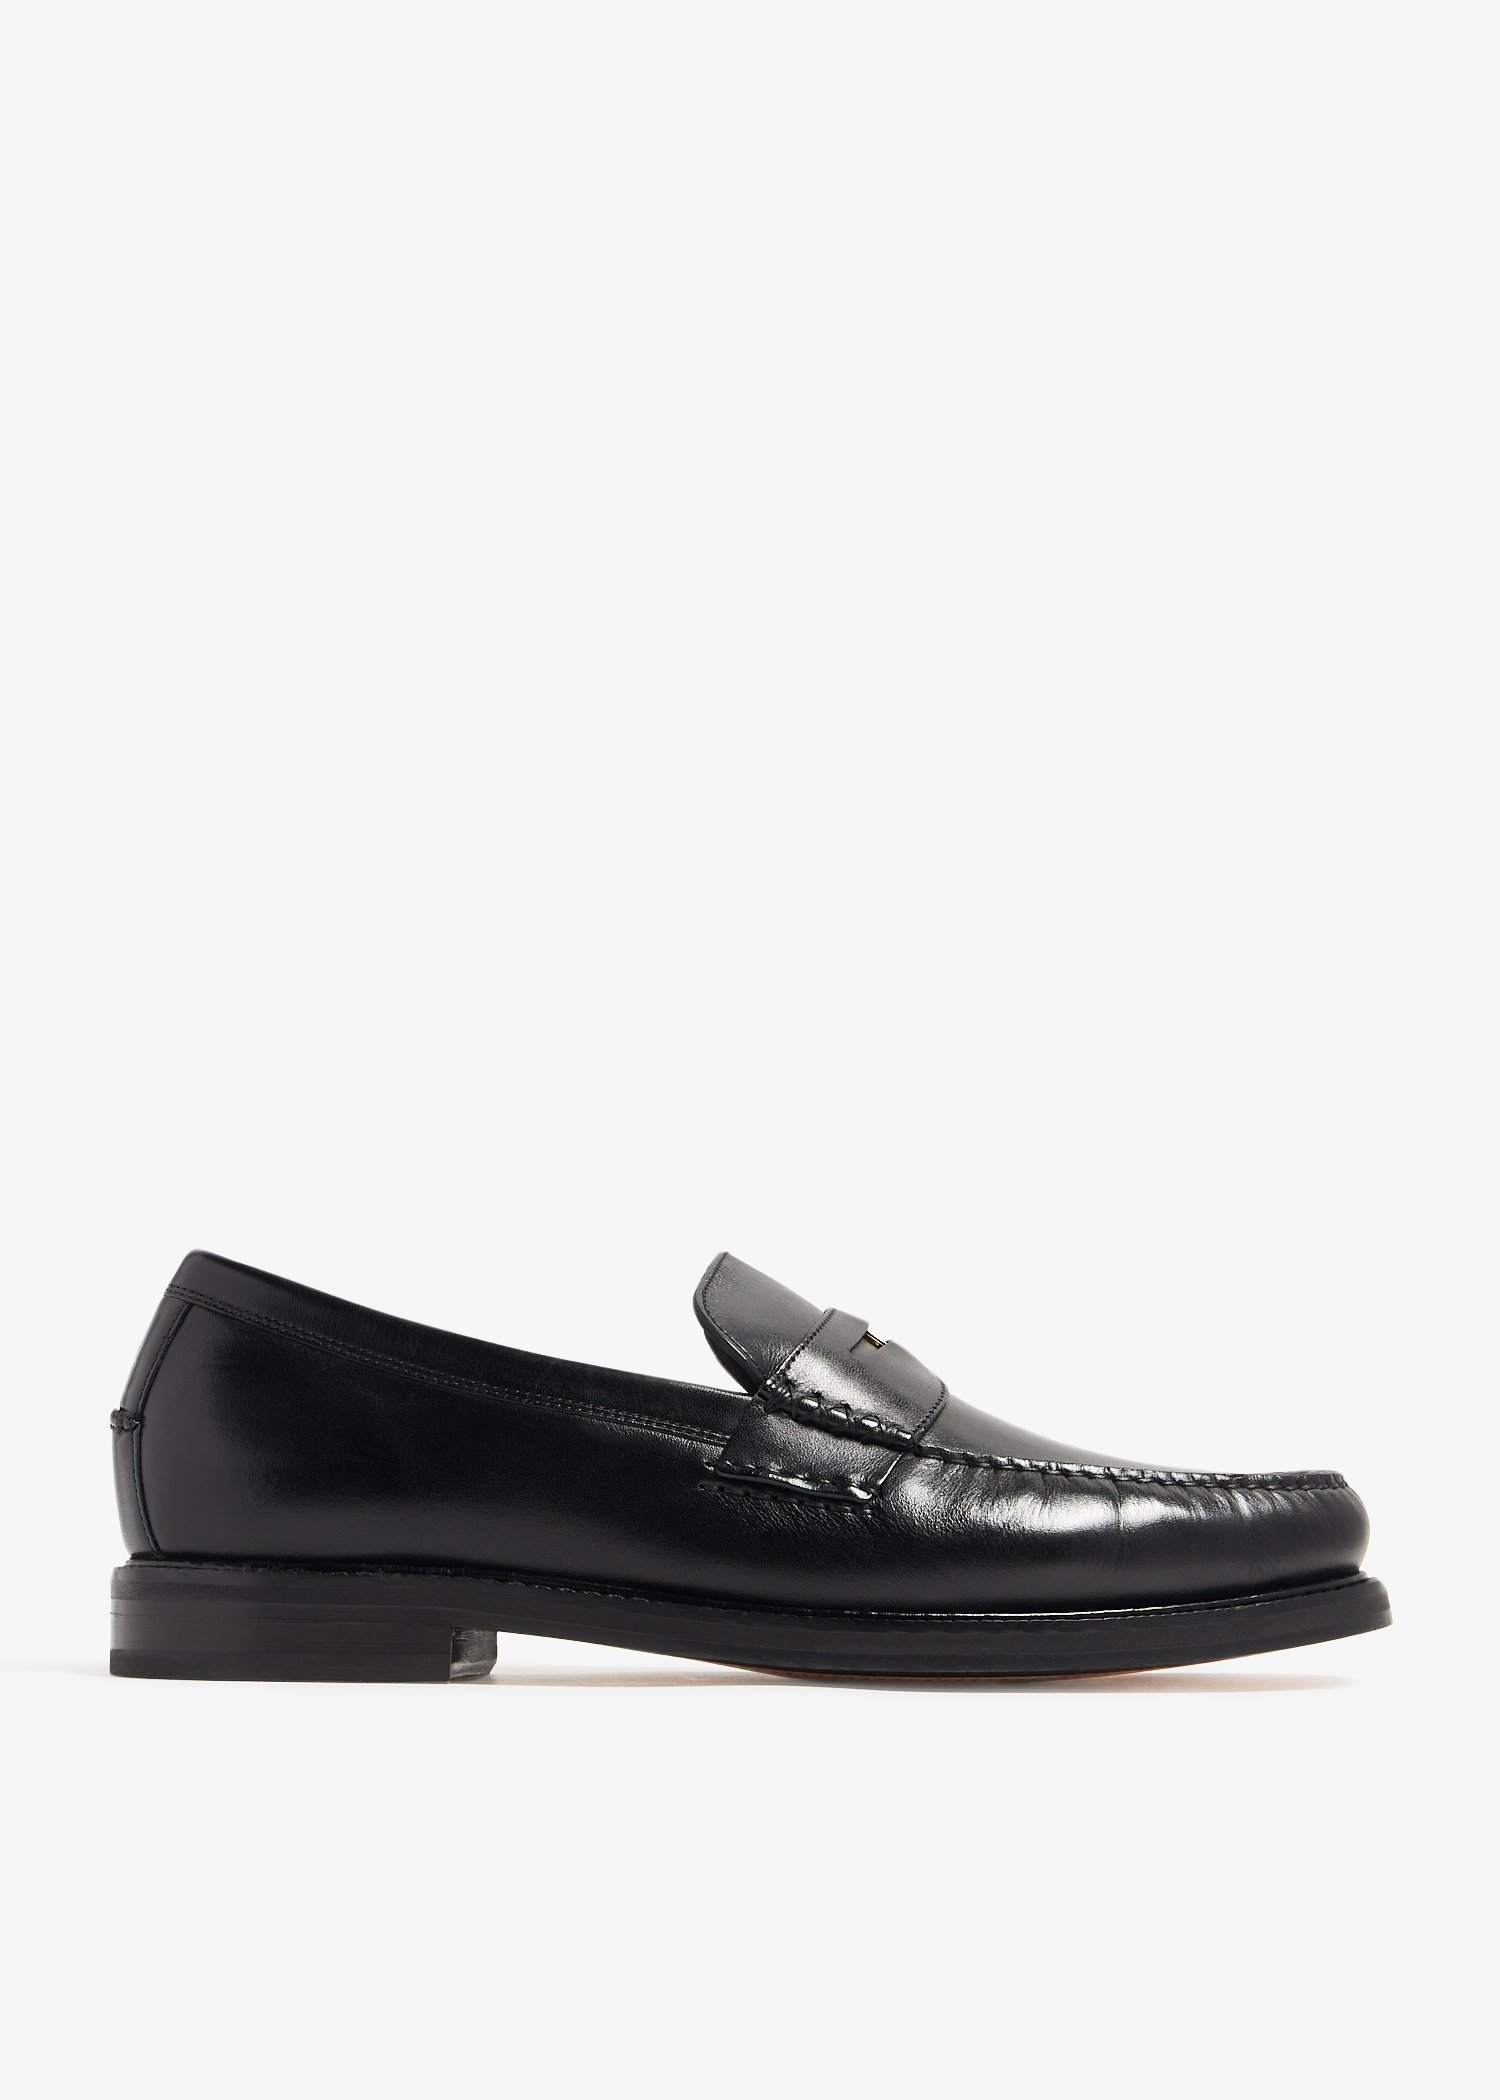 Cole Haan American Classics Pinch Penny loafers for Men - Black in